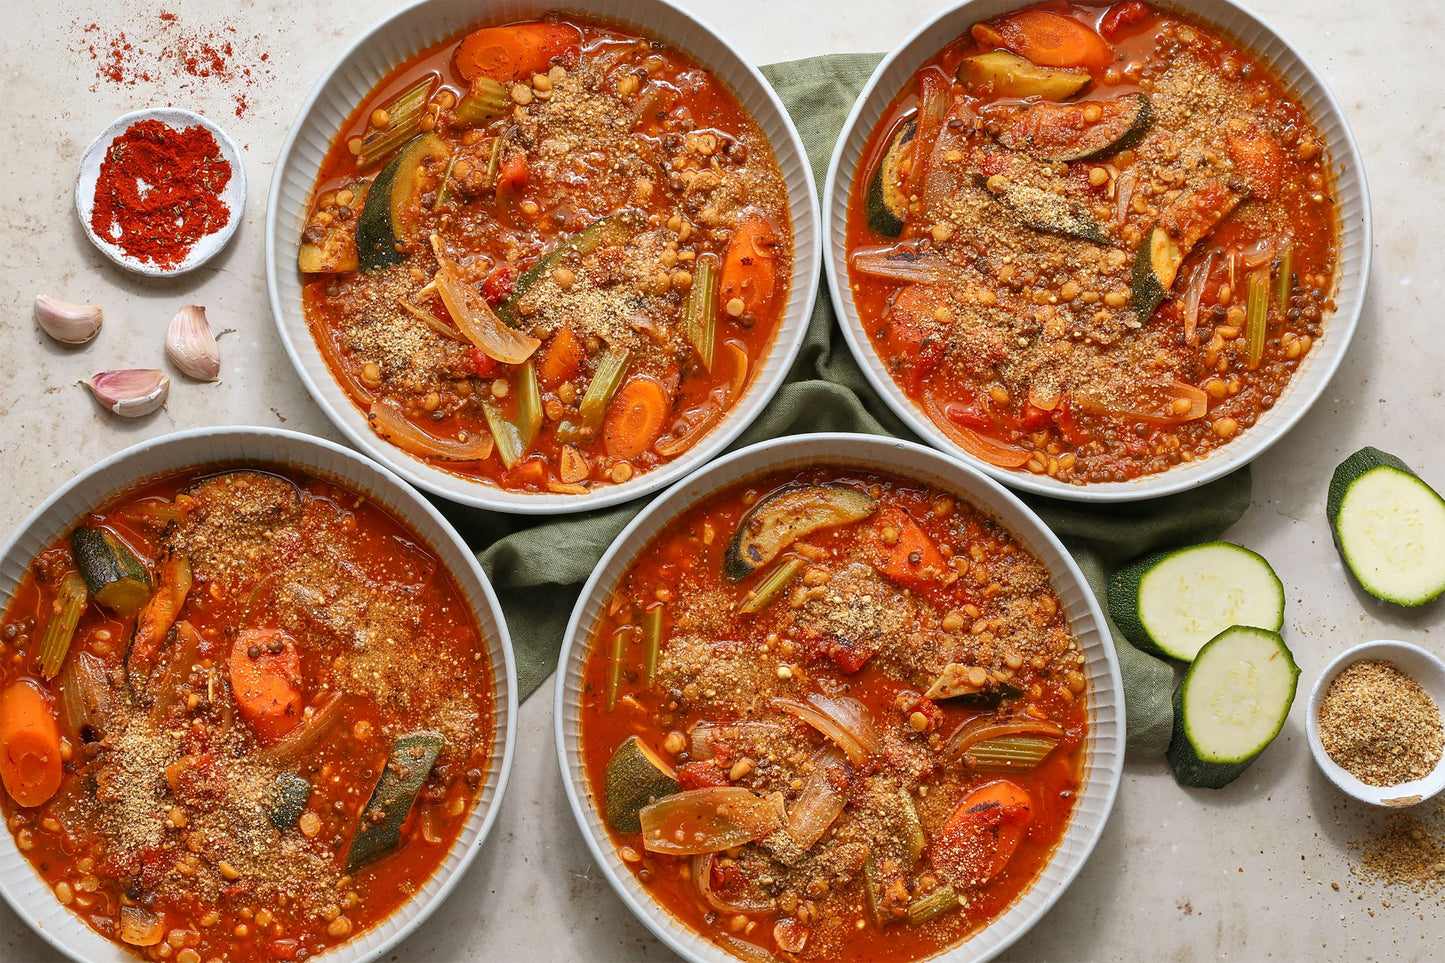 Bowls of tomato and grain soup; including quinoa and lentils